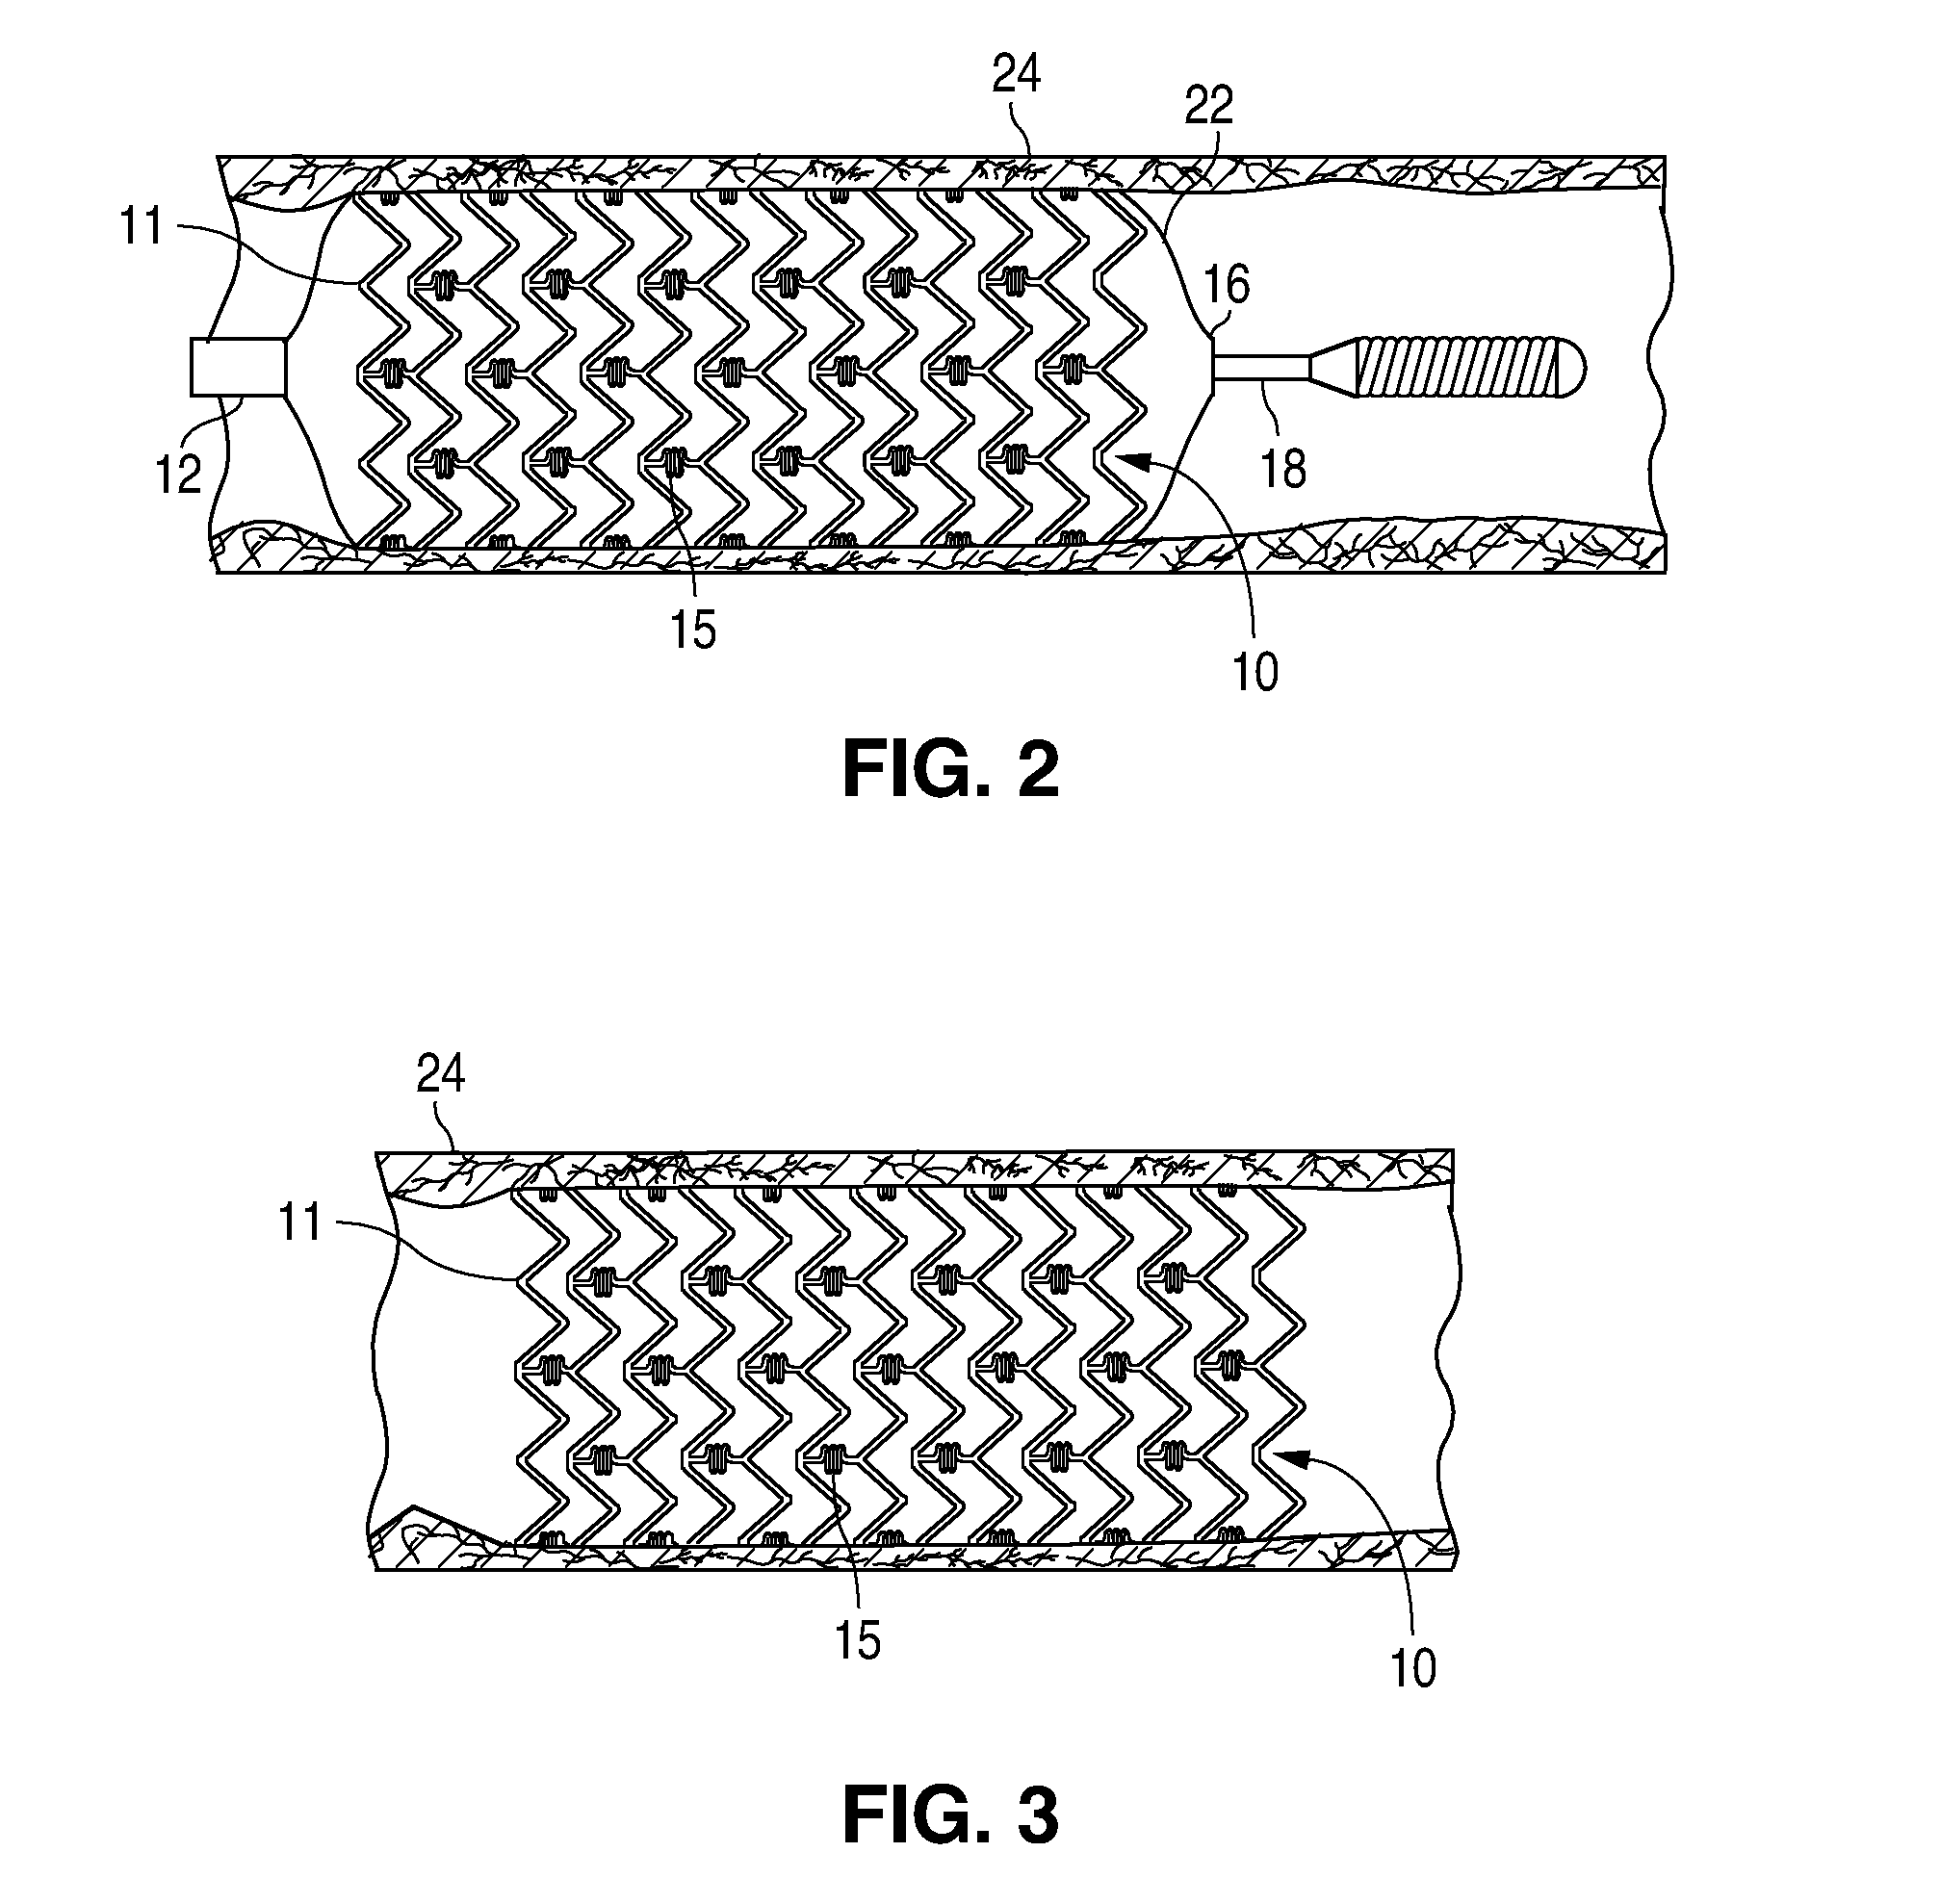 Treatment Of Diabetic Patients With A Stent And An Adjunctive Drug Formulation